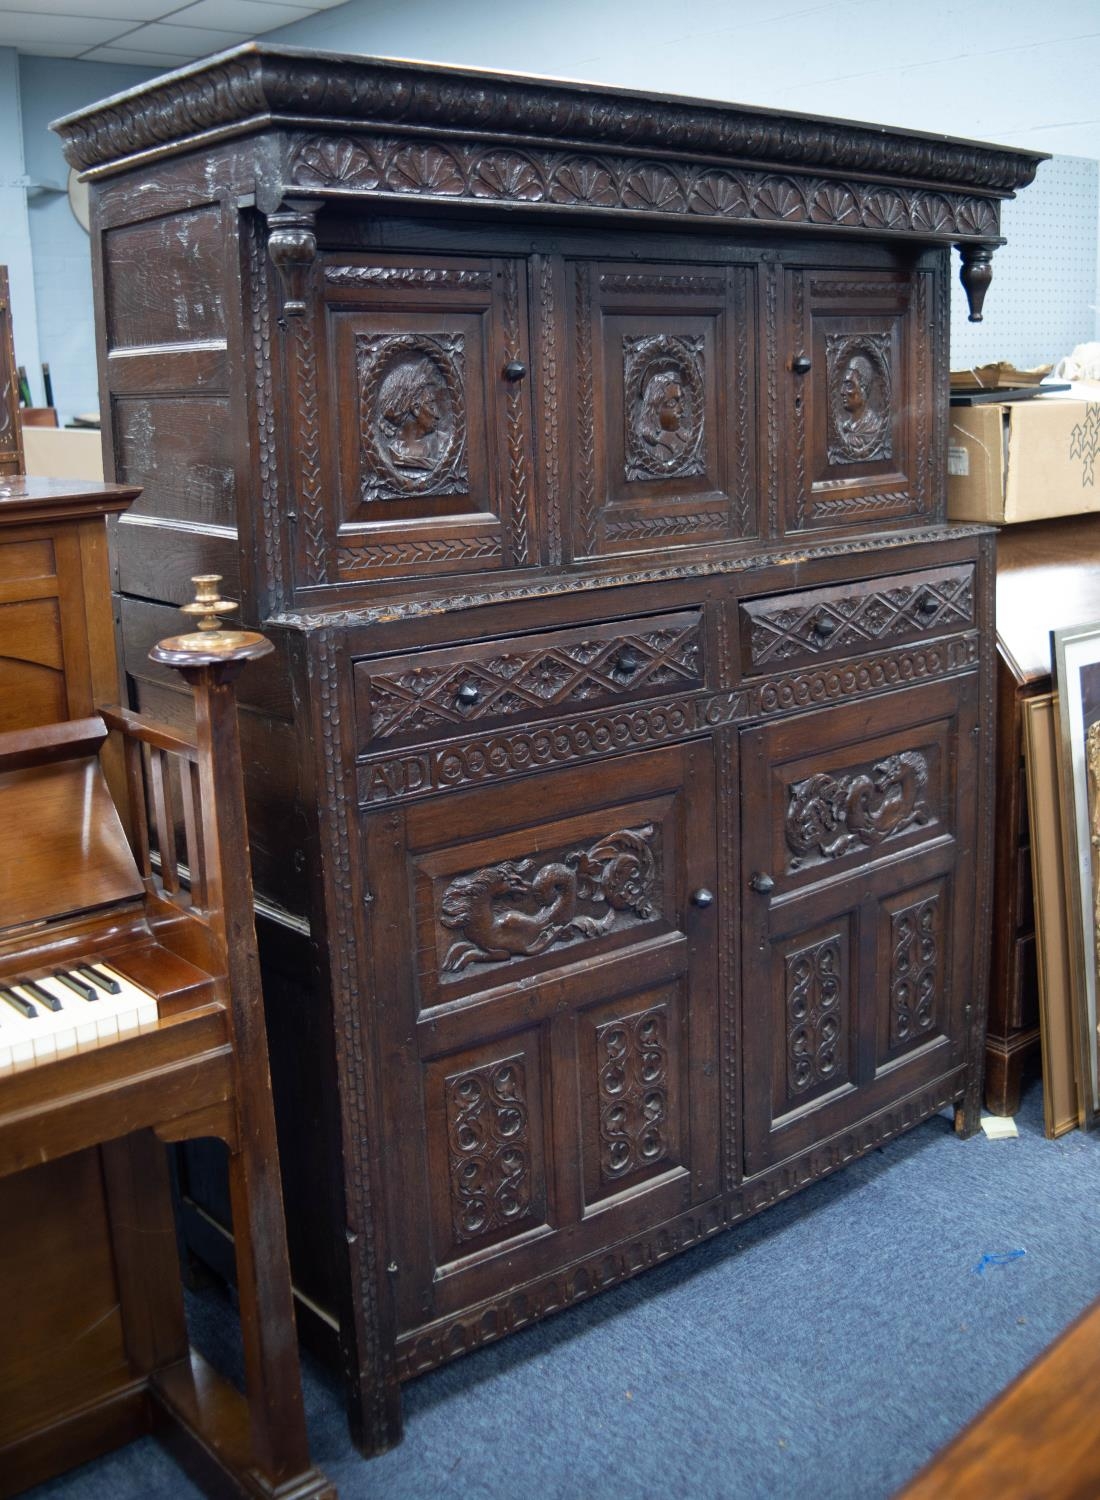 LATE 17th CENTURY CARVED OAK TWO-PART COURT CUPBOARD with later carved decoration of heads in